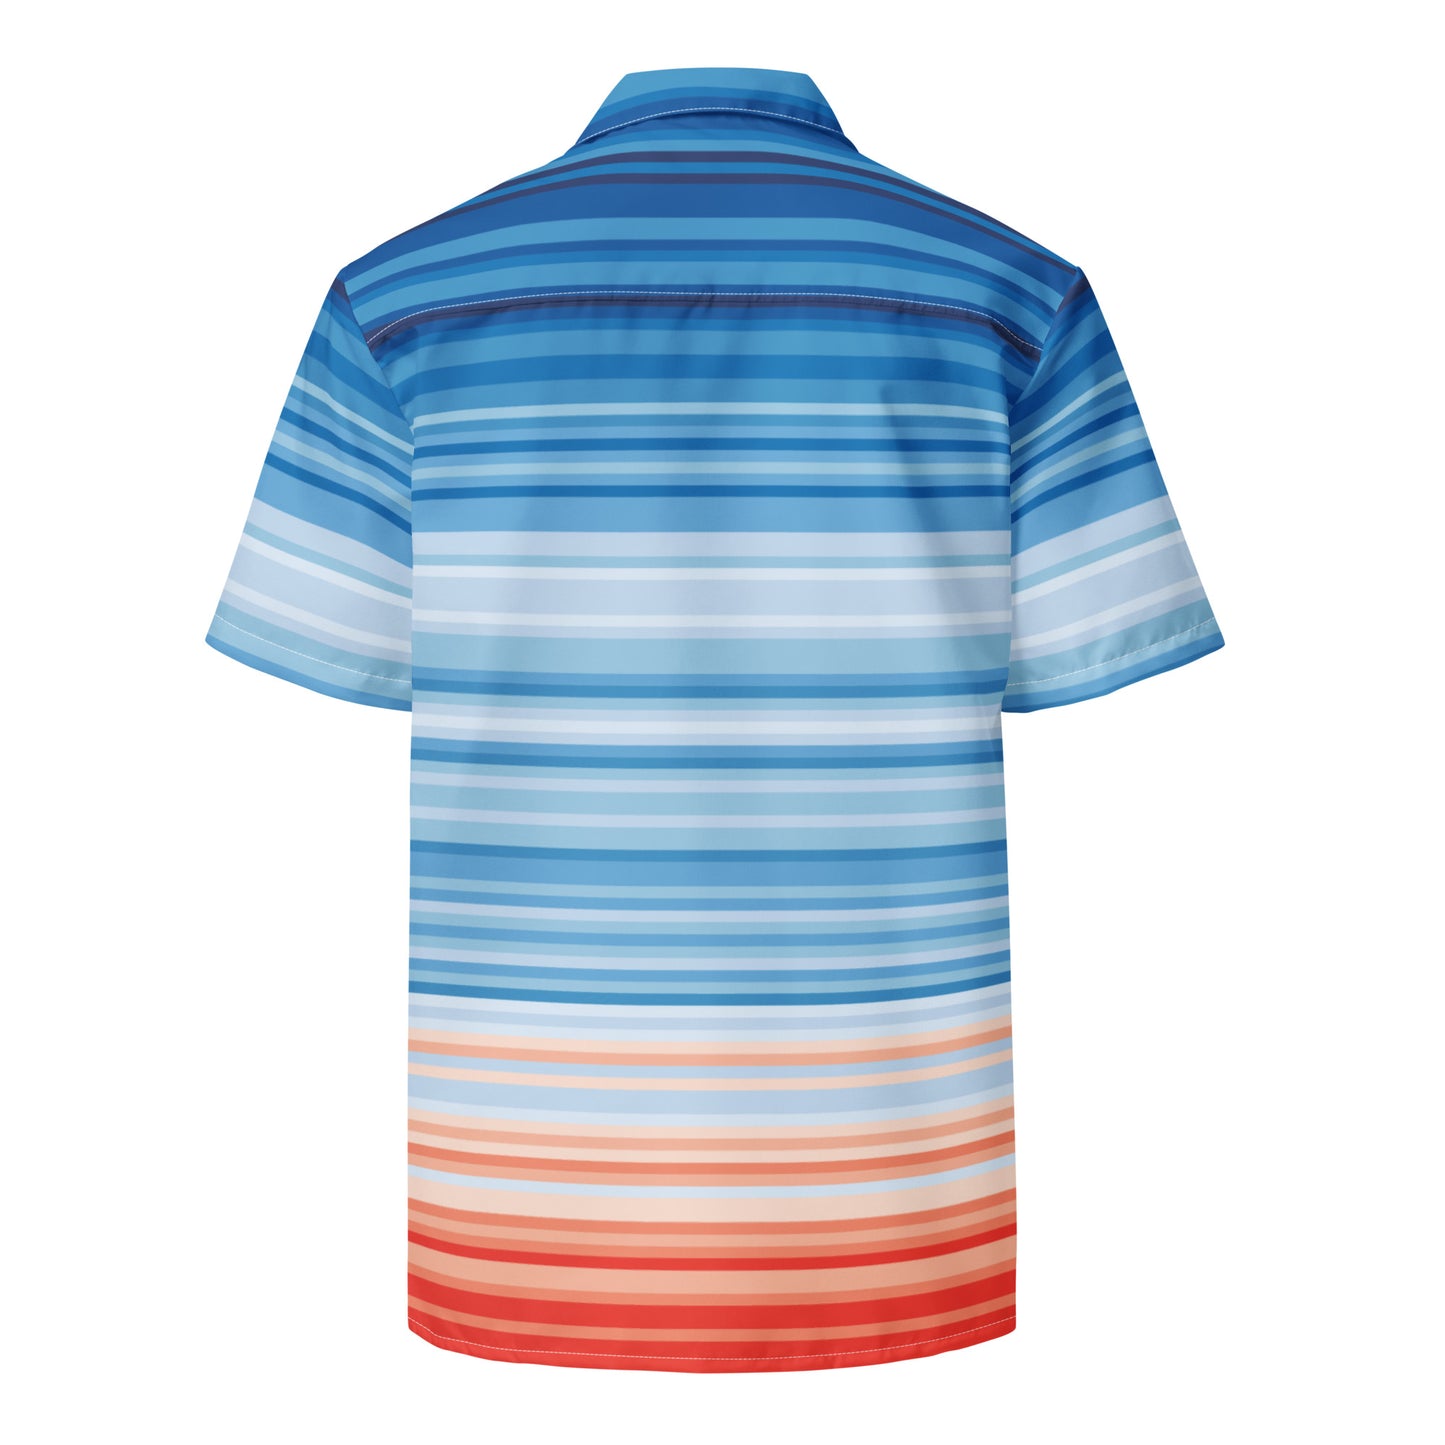 Climate Change Global Warming Stripes - Sustainably Made Unisex button shirt horizontal